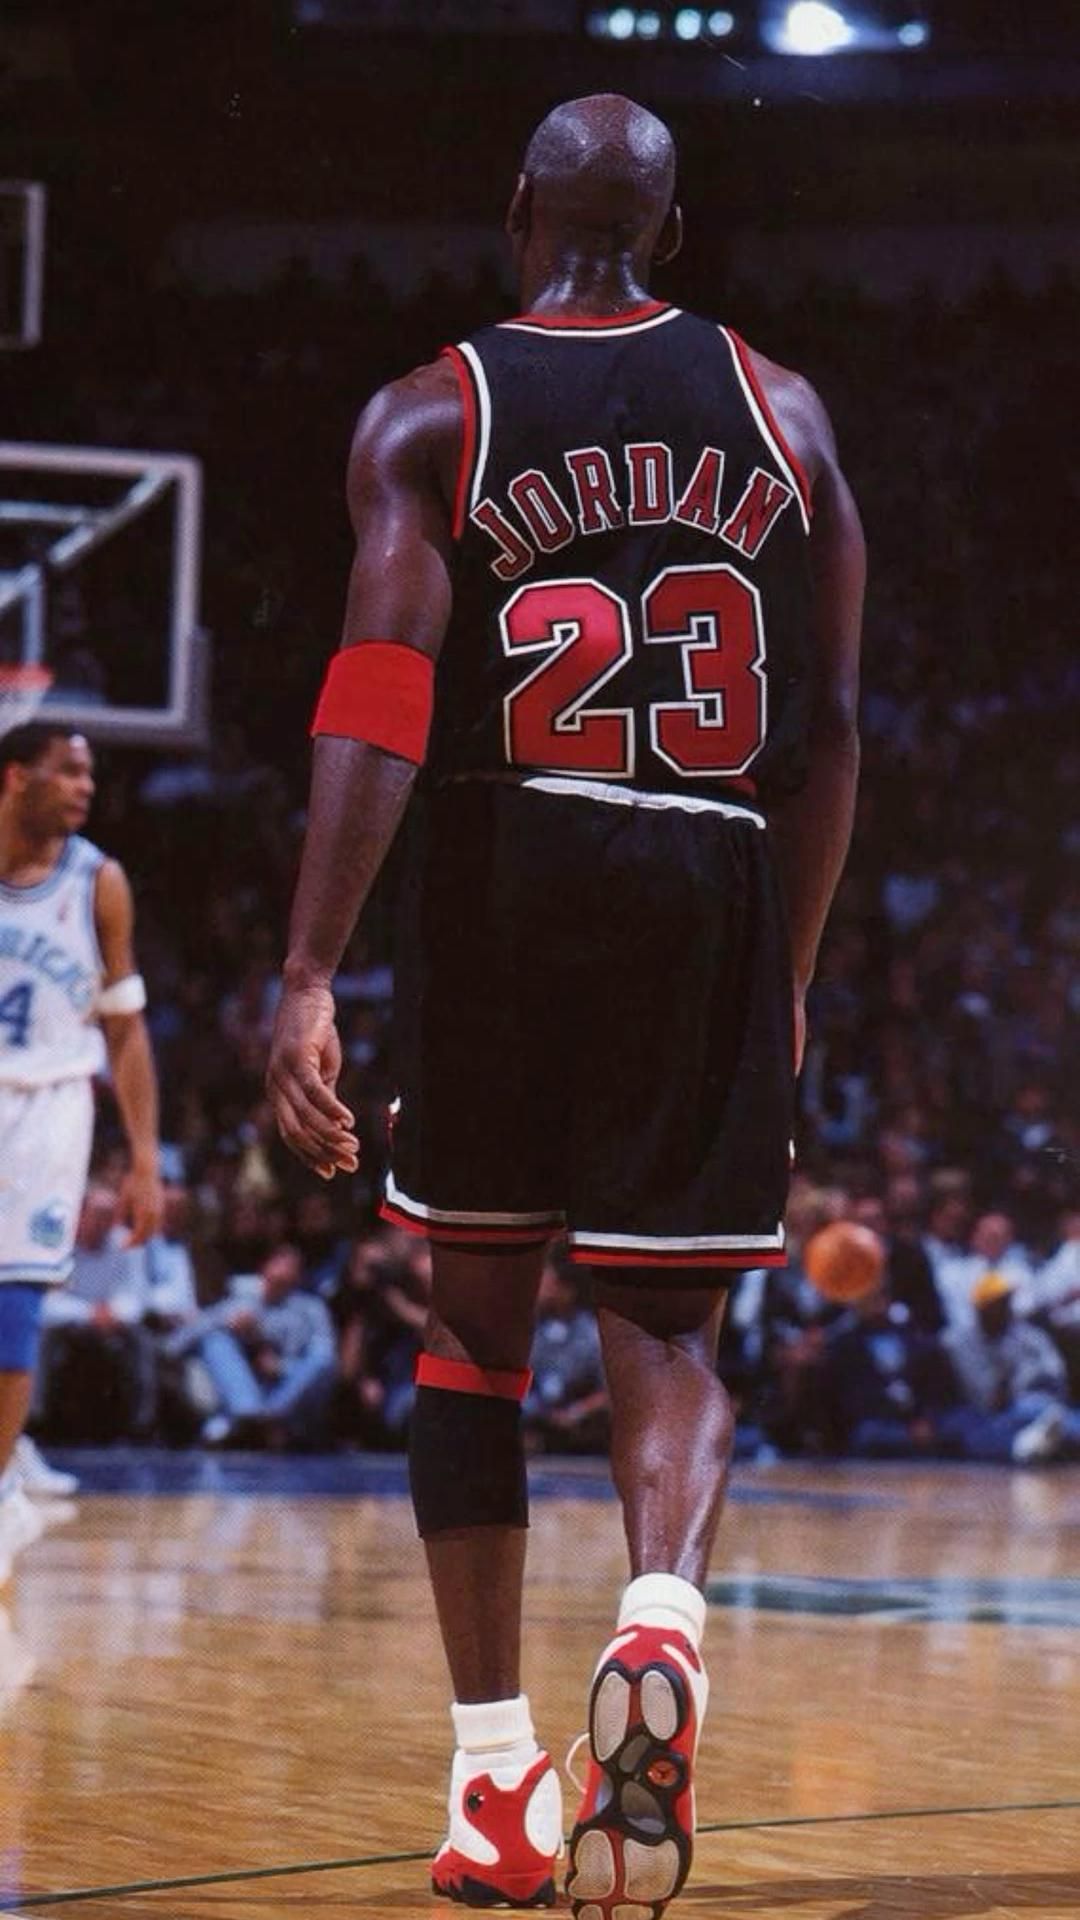 IPhone 7 Wallpaper HD Michael Jordan with high-resolution 1080x1920 pixel. You can use this wallpaper for your iPhone 5, 6, 7, 8, X, XS, XR backgrounds, Mobile Screensaver, or iPad Lock Screen - Air Jordan, Michael Jordan